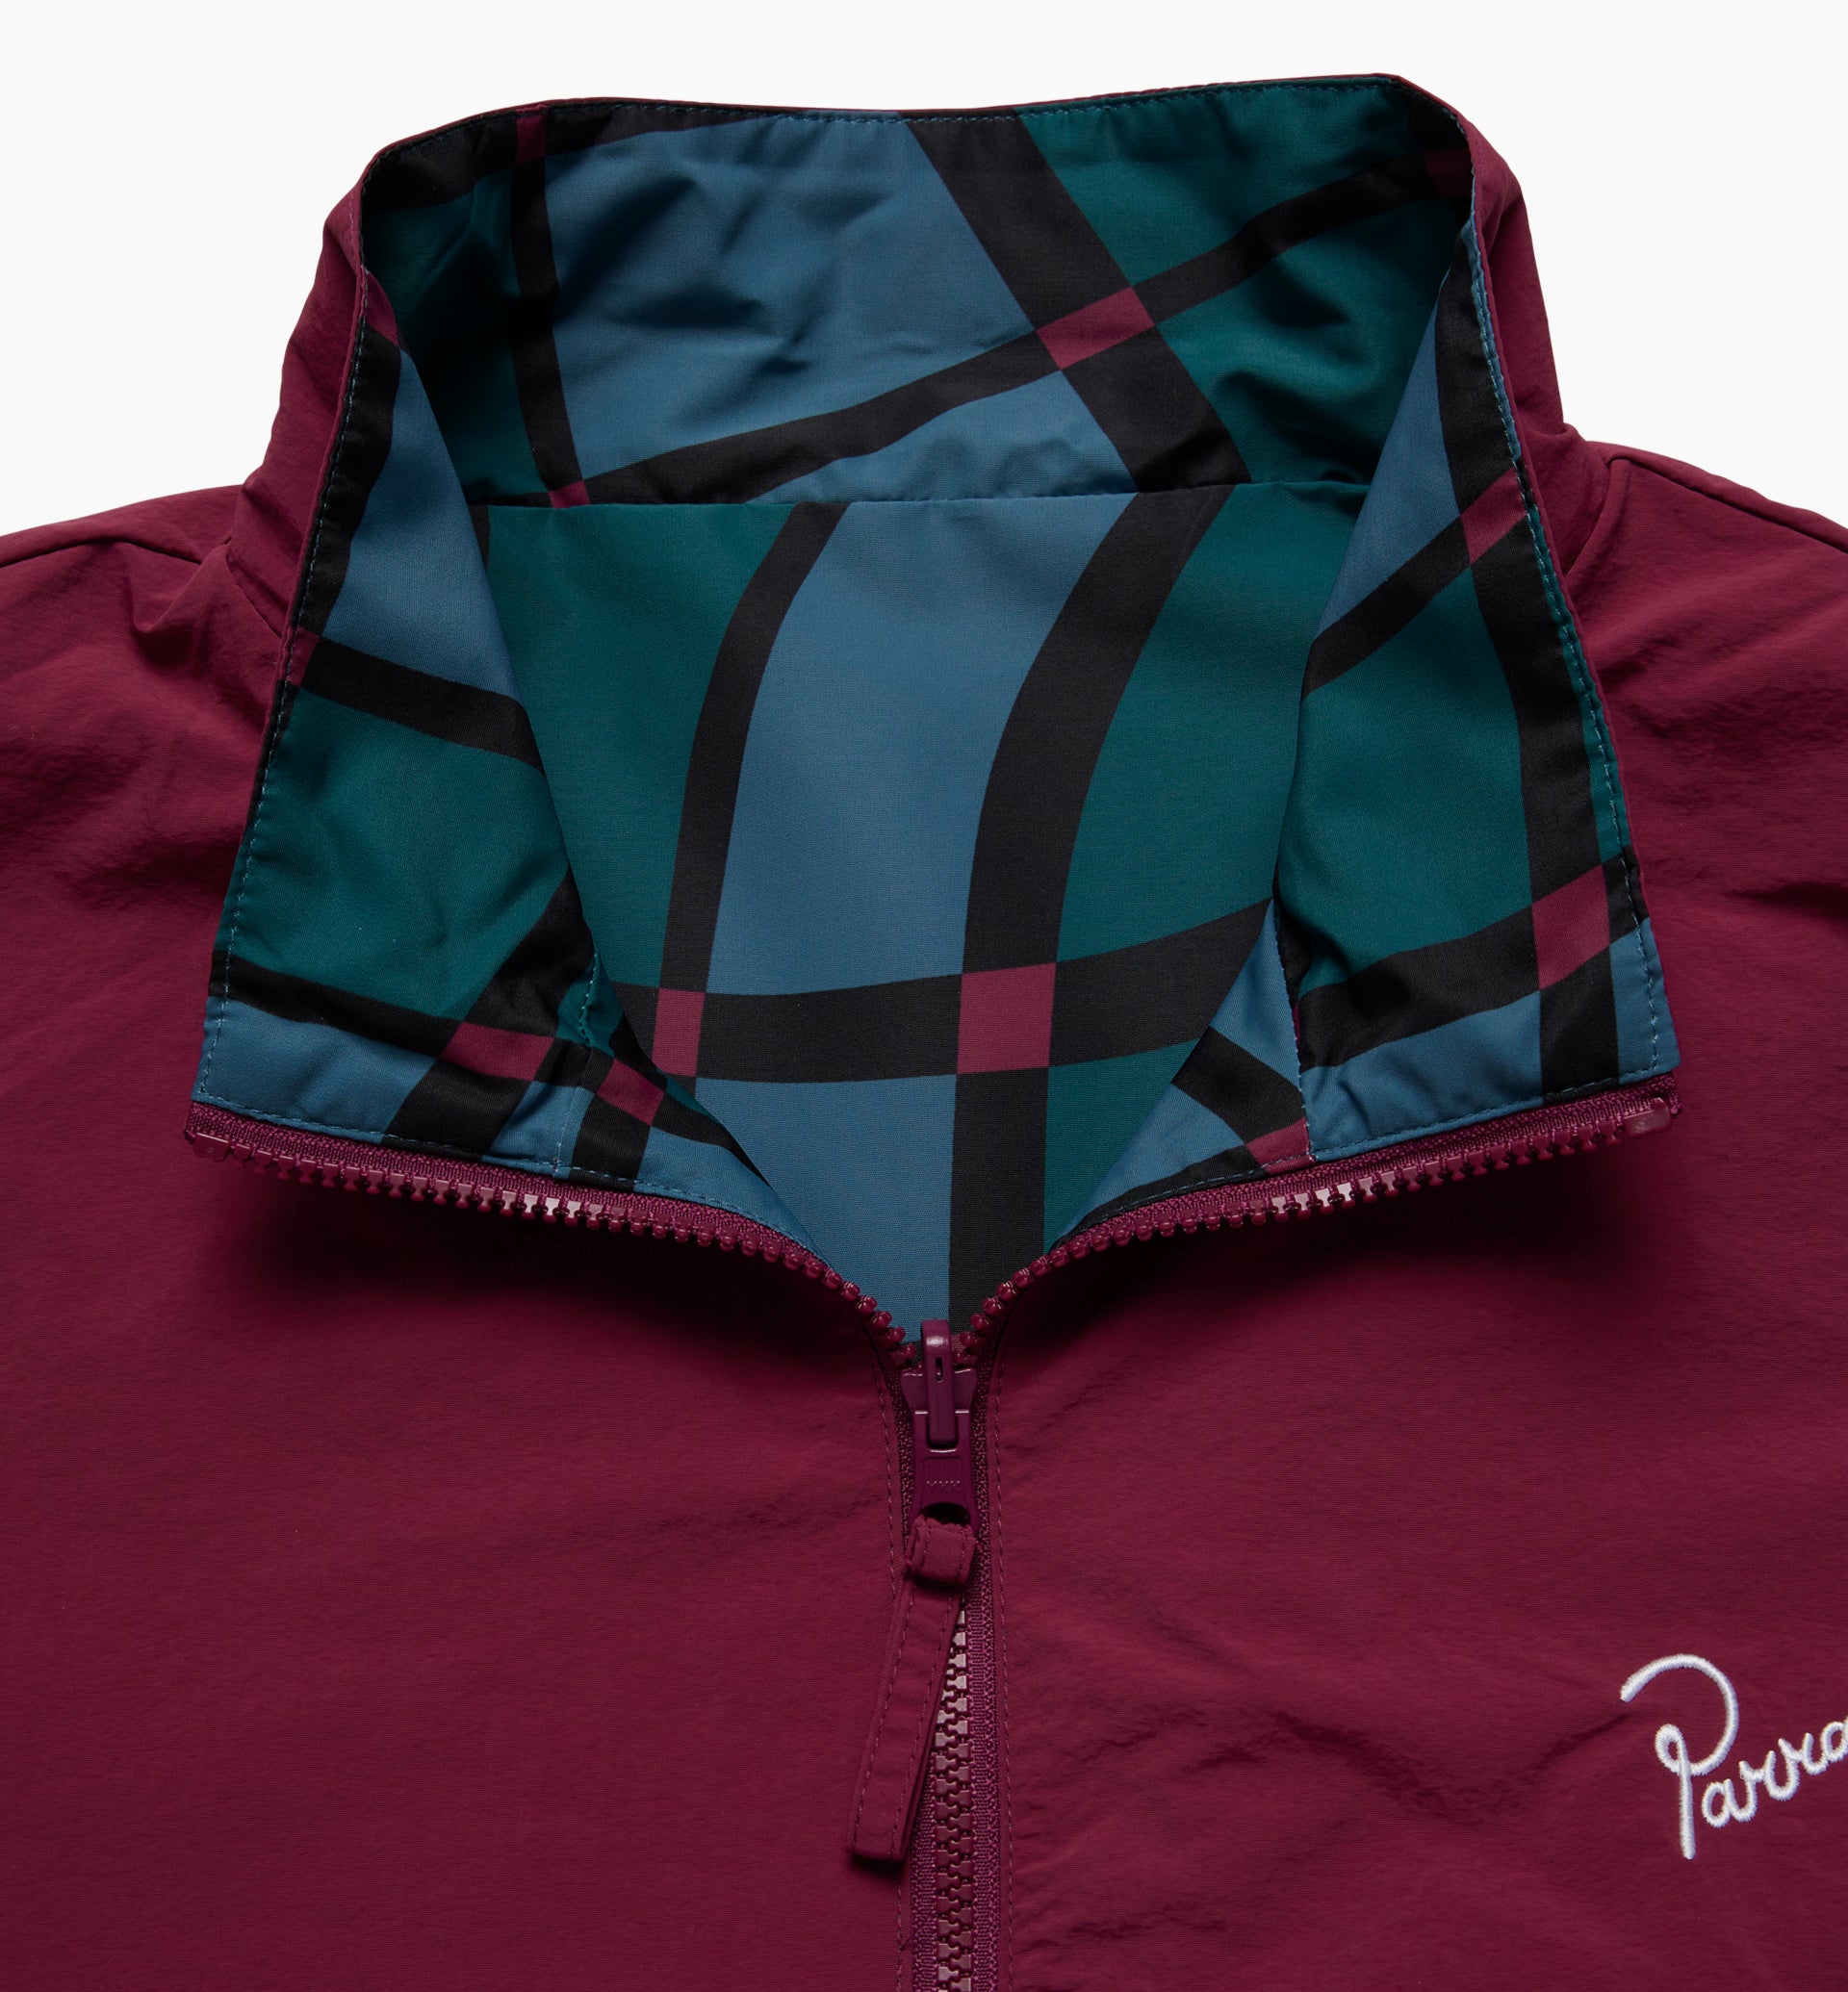 PARRA - SQUARED WAVES PATTERN TRACK TOP